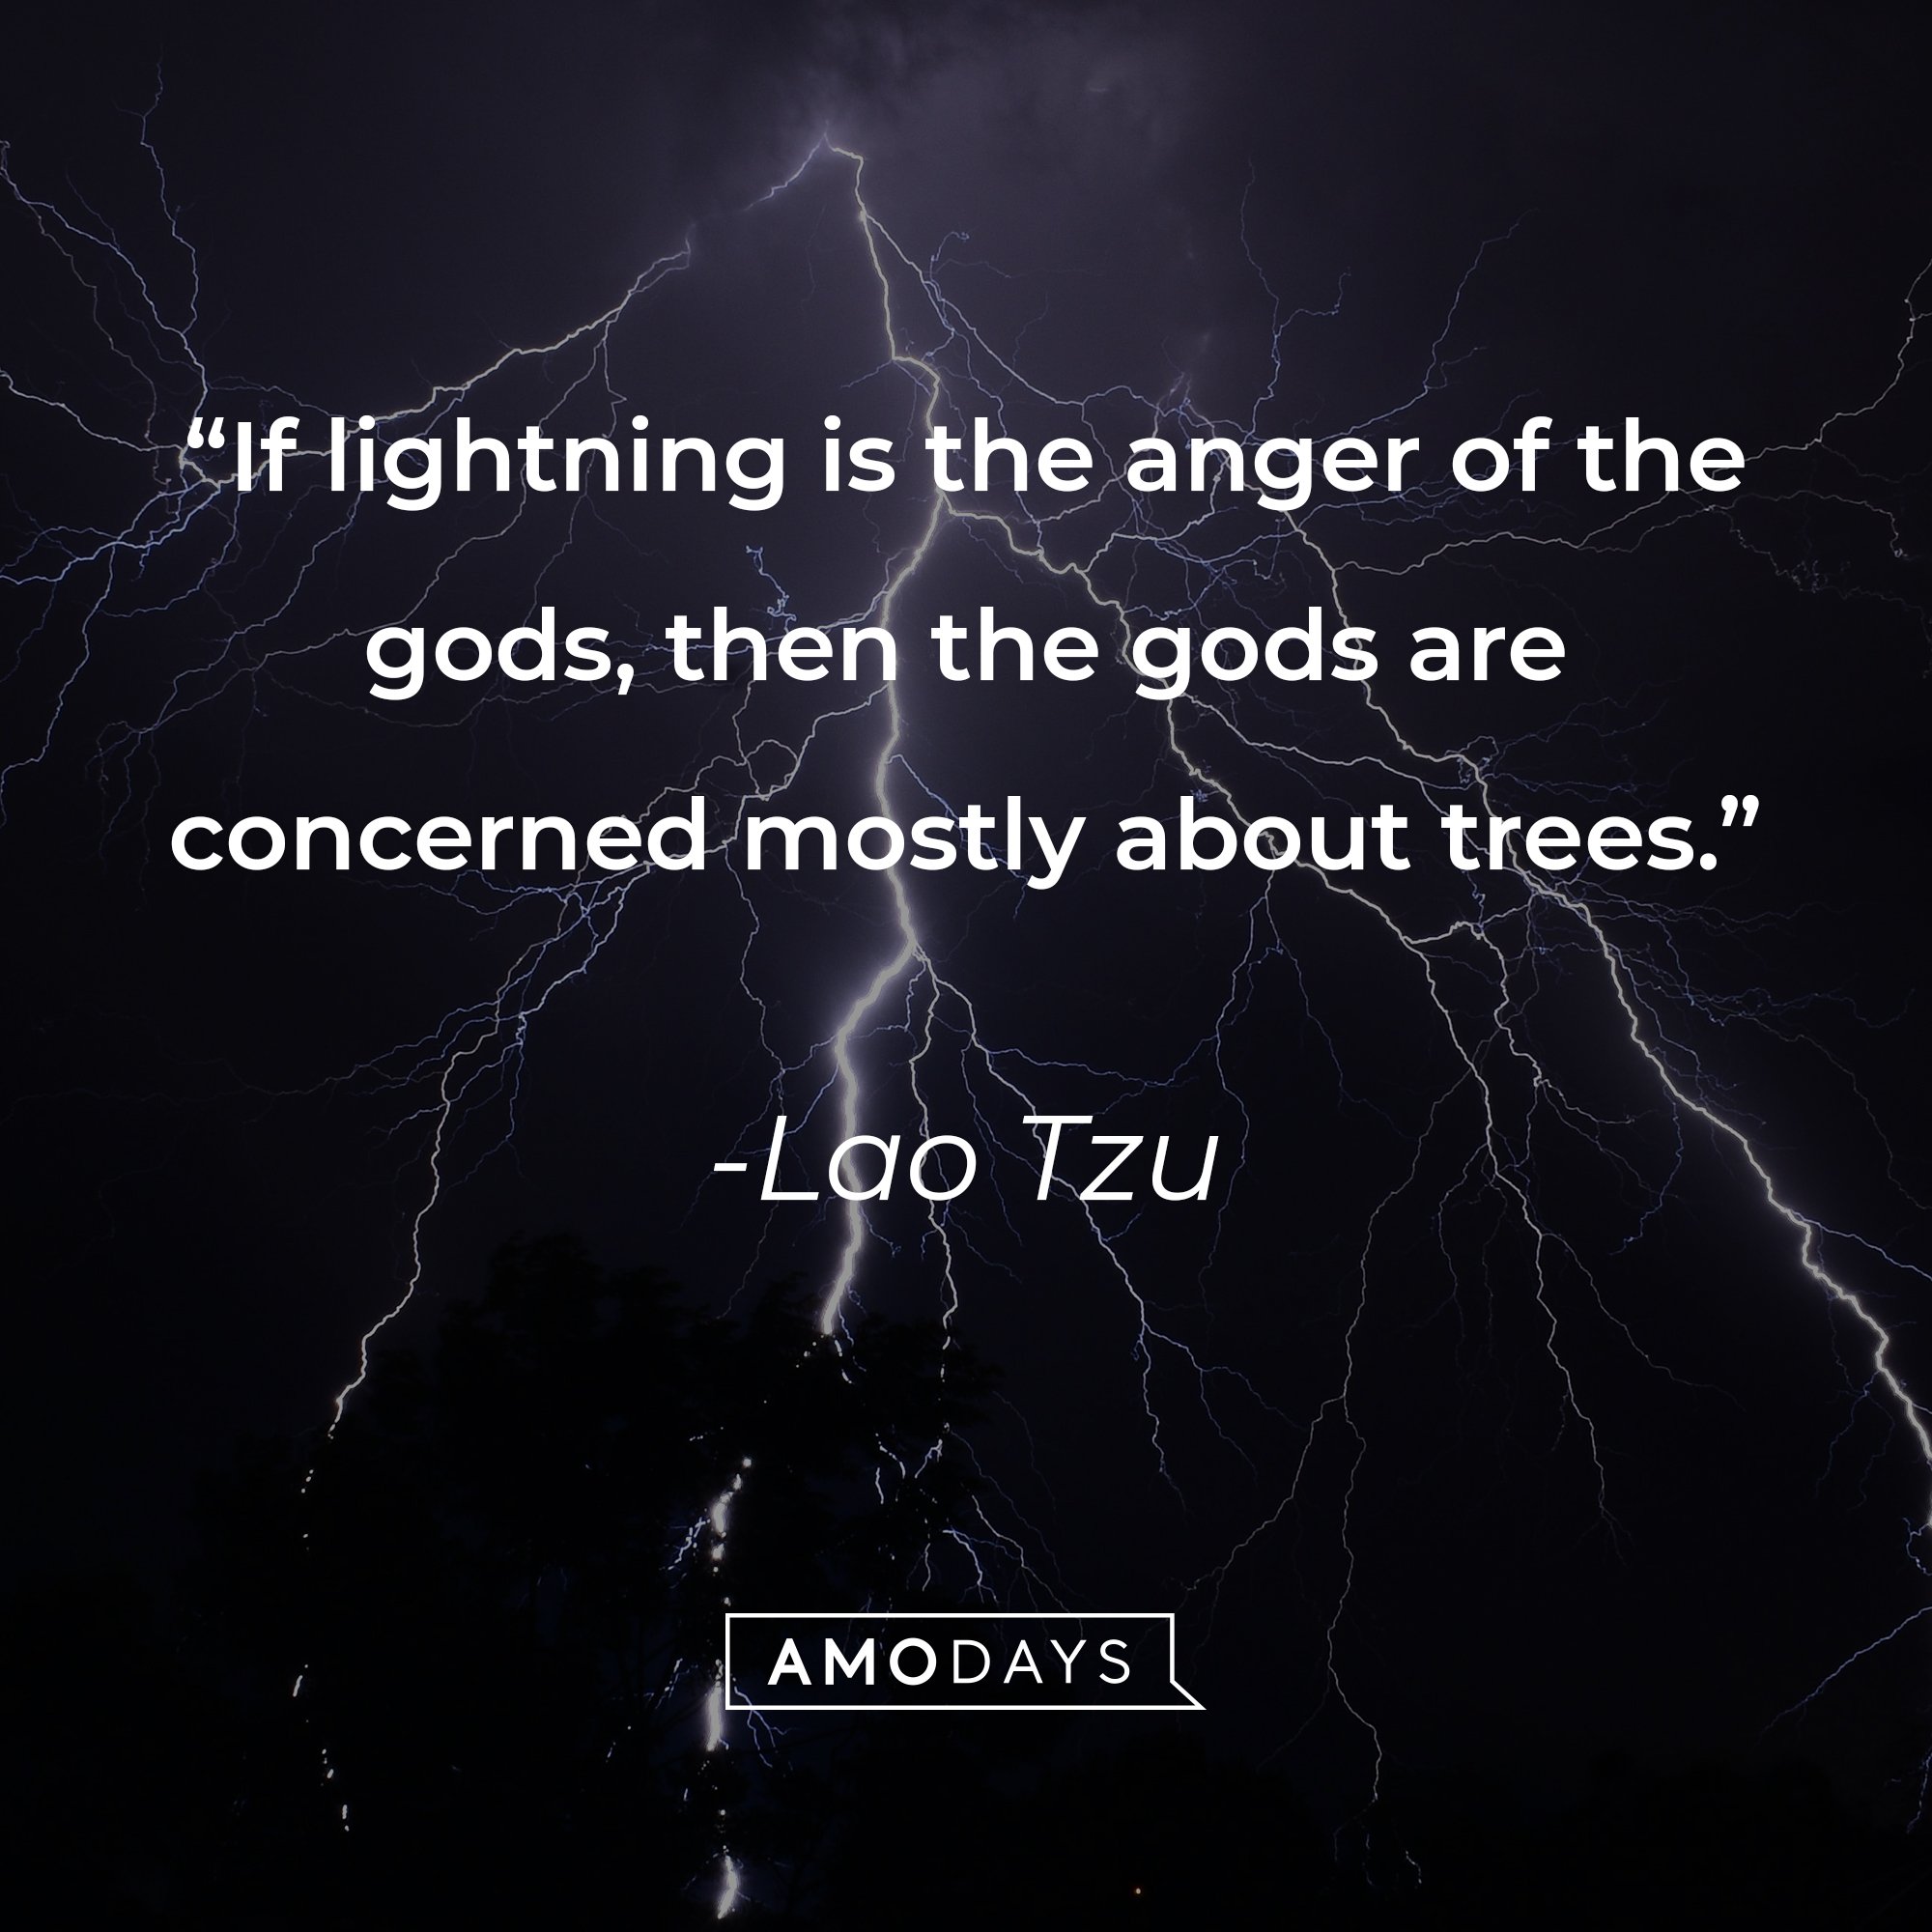 Lao Tzu’s quote: "If lightning is the anger of the gods, then the gods are concerned mostly about trees." | Image: AmoDays    